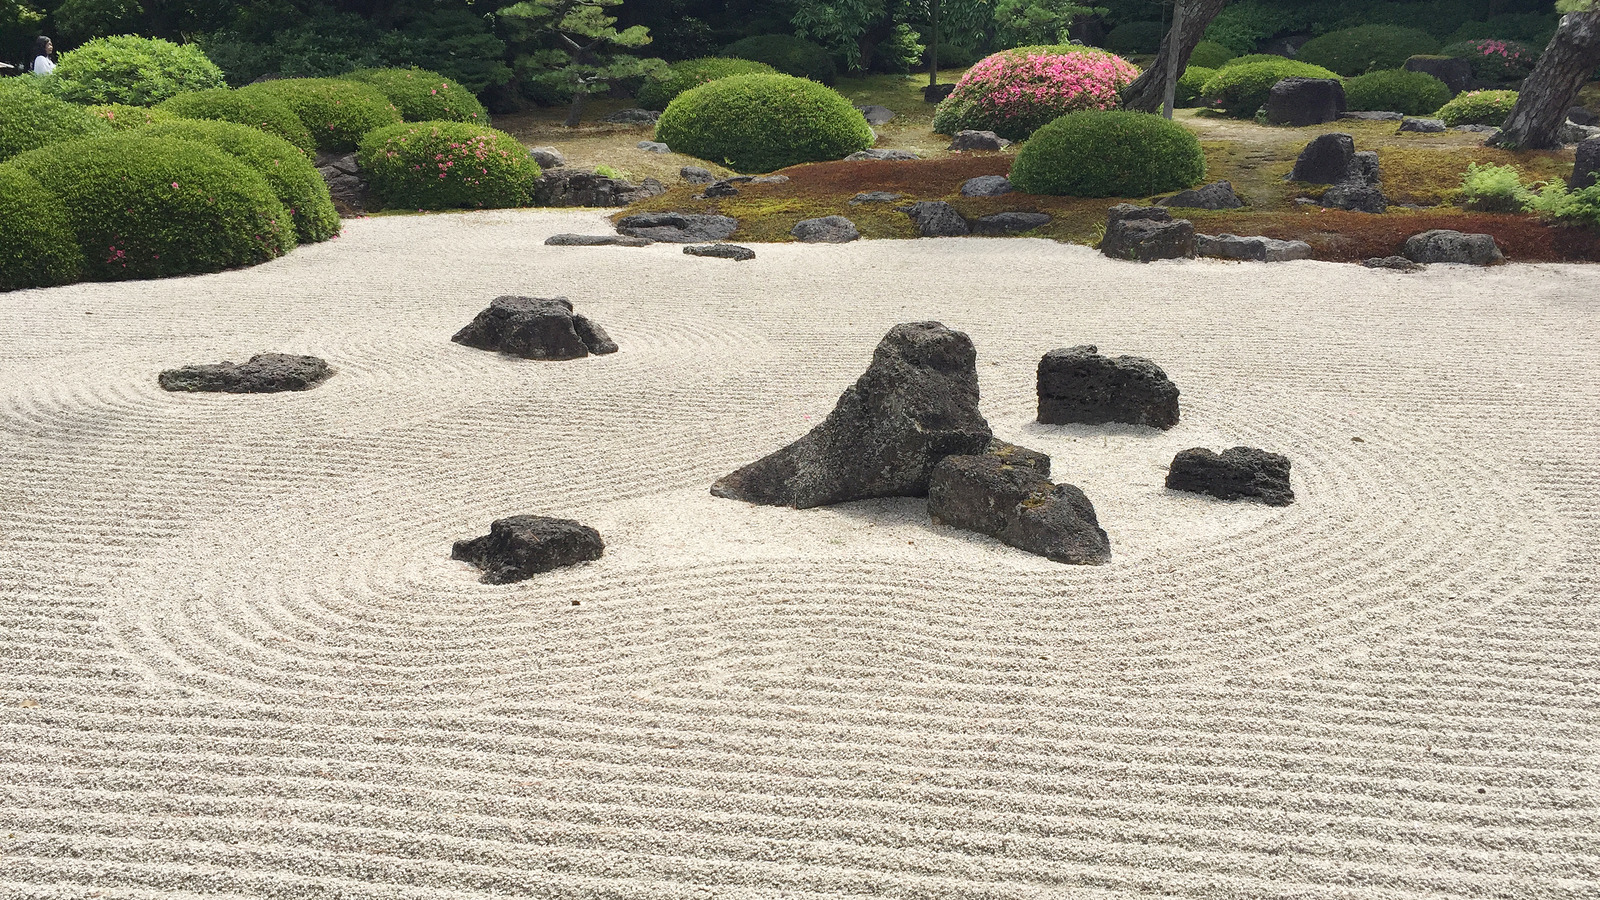 https://www.housedigest.com/img/gallery/what-is-a-zen-garden-and-what-makes-them-different/l-intro-1641227755.jpg